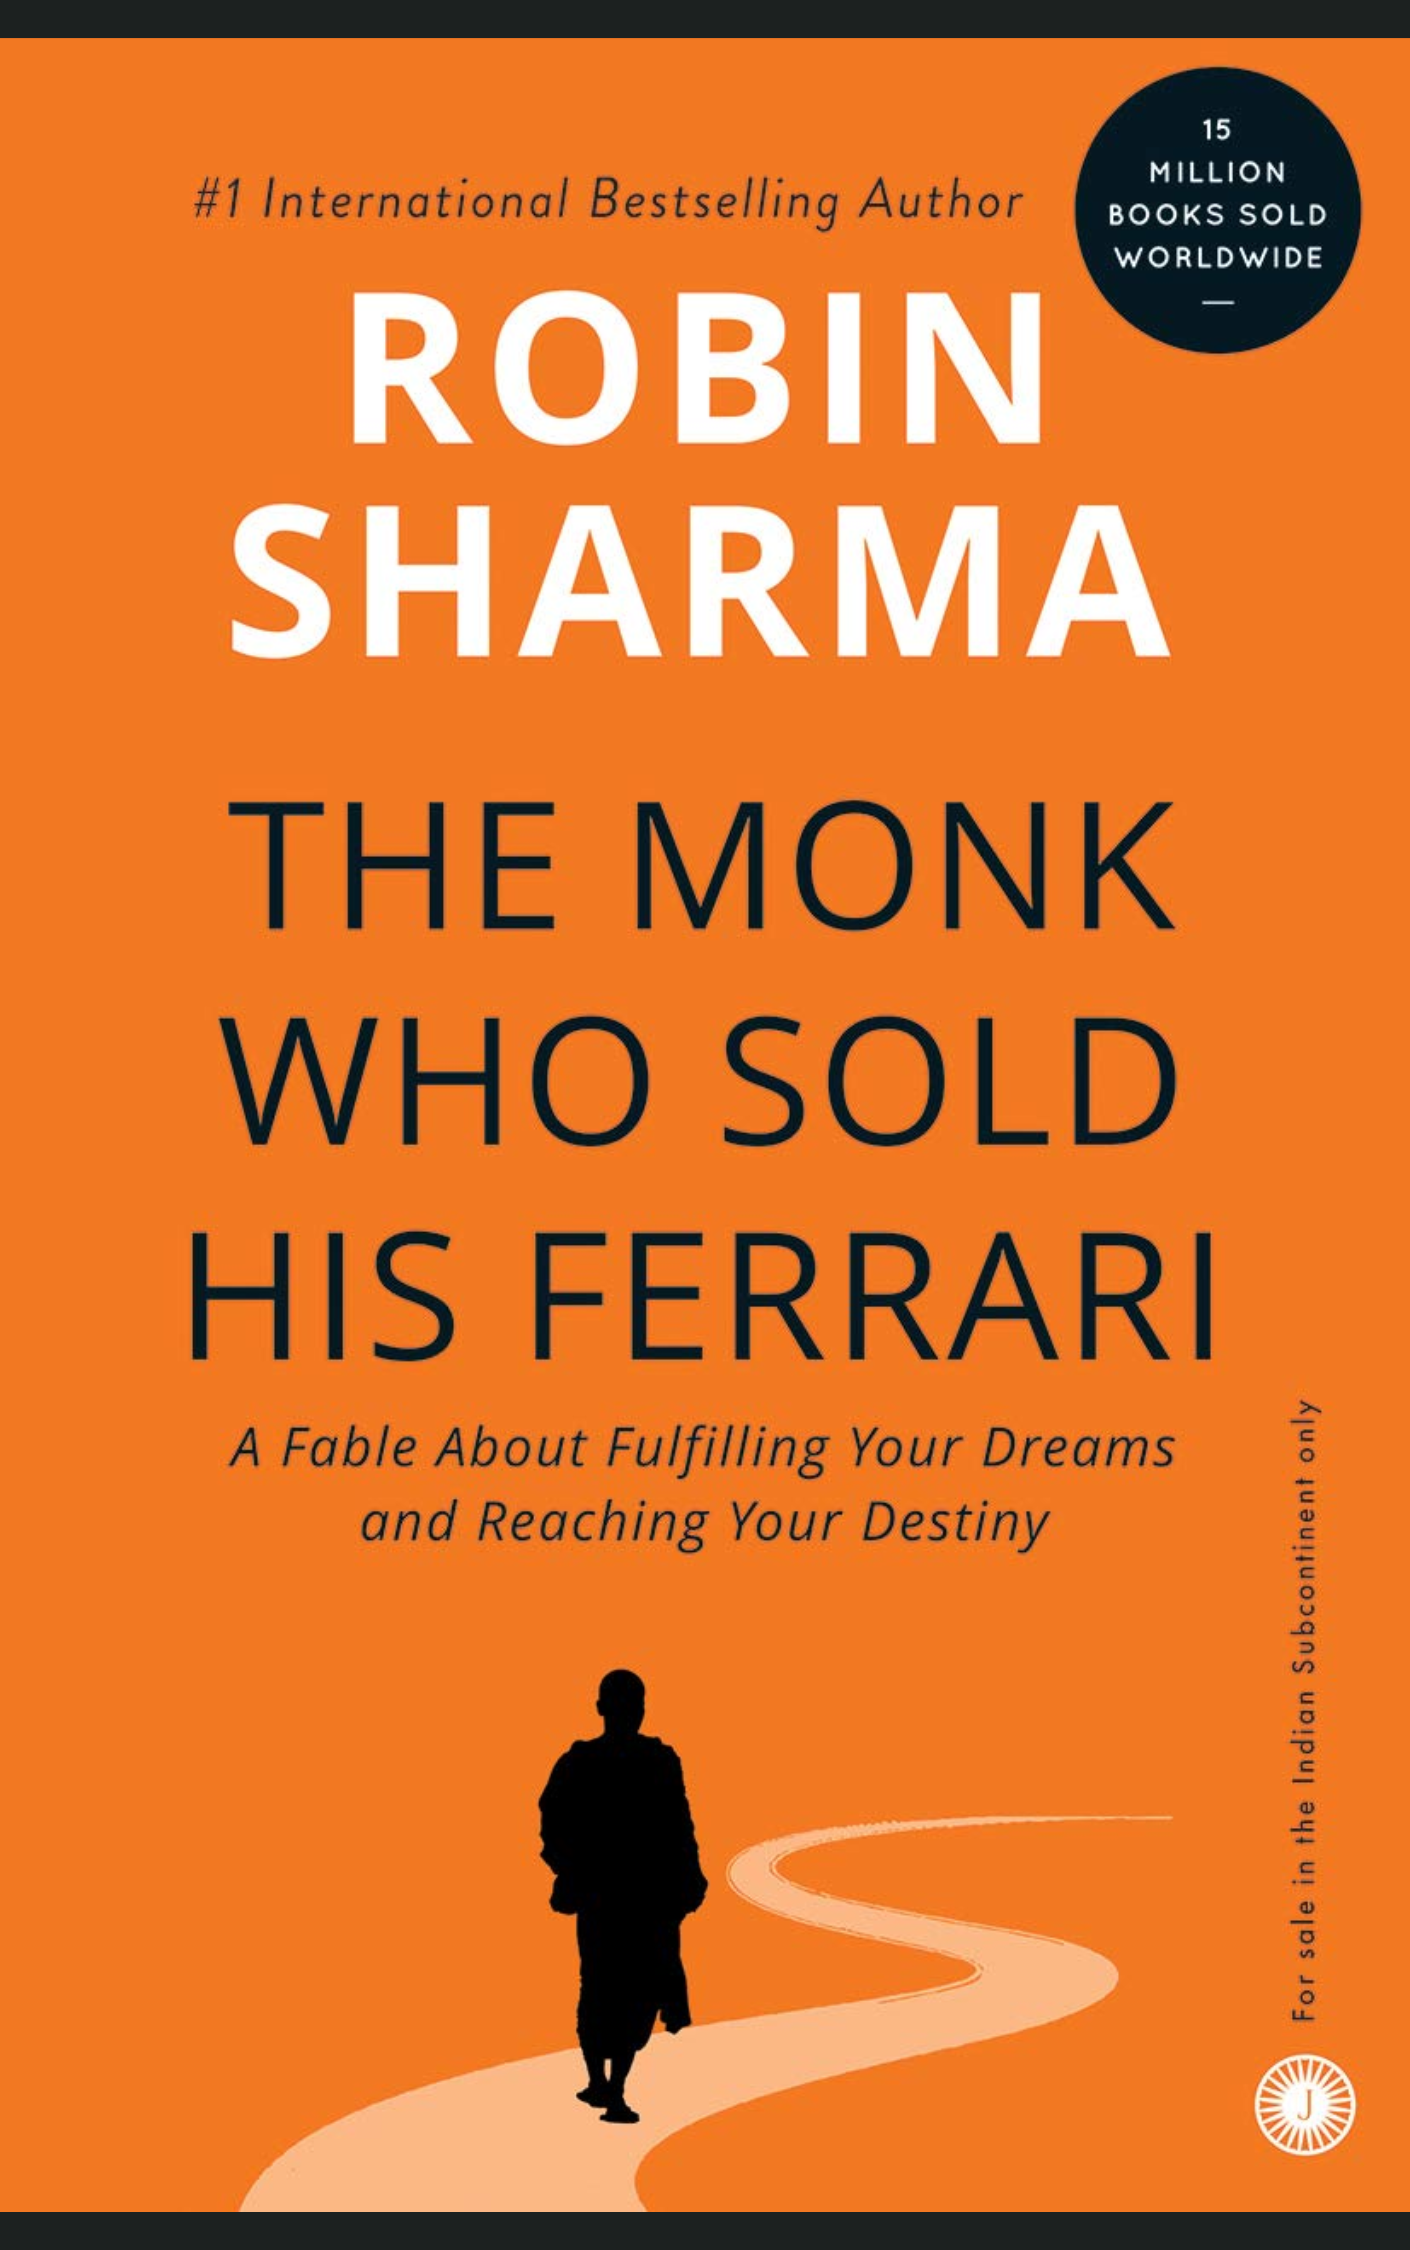 THE MONK WHO SOLD HIS FERRARI by ROBIN SHARMA